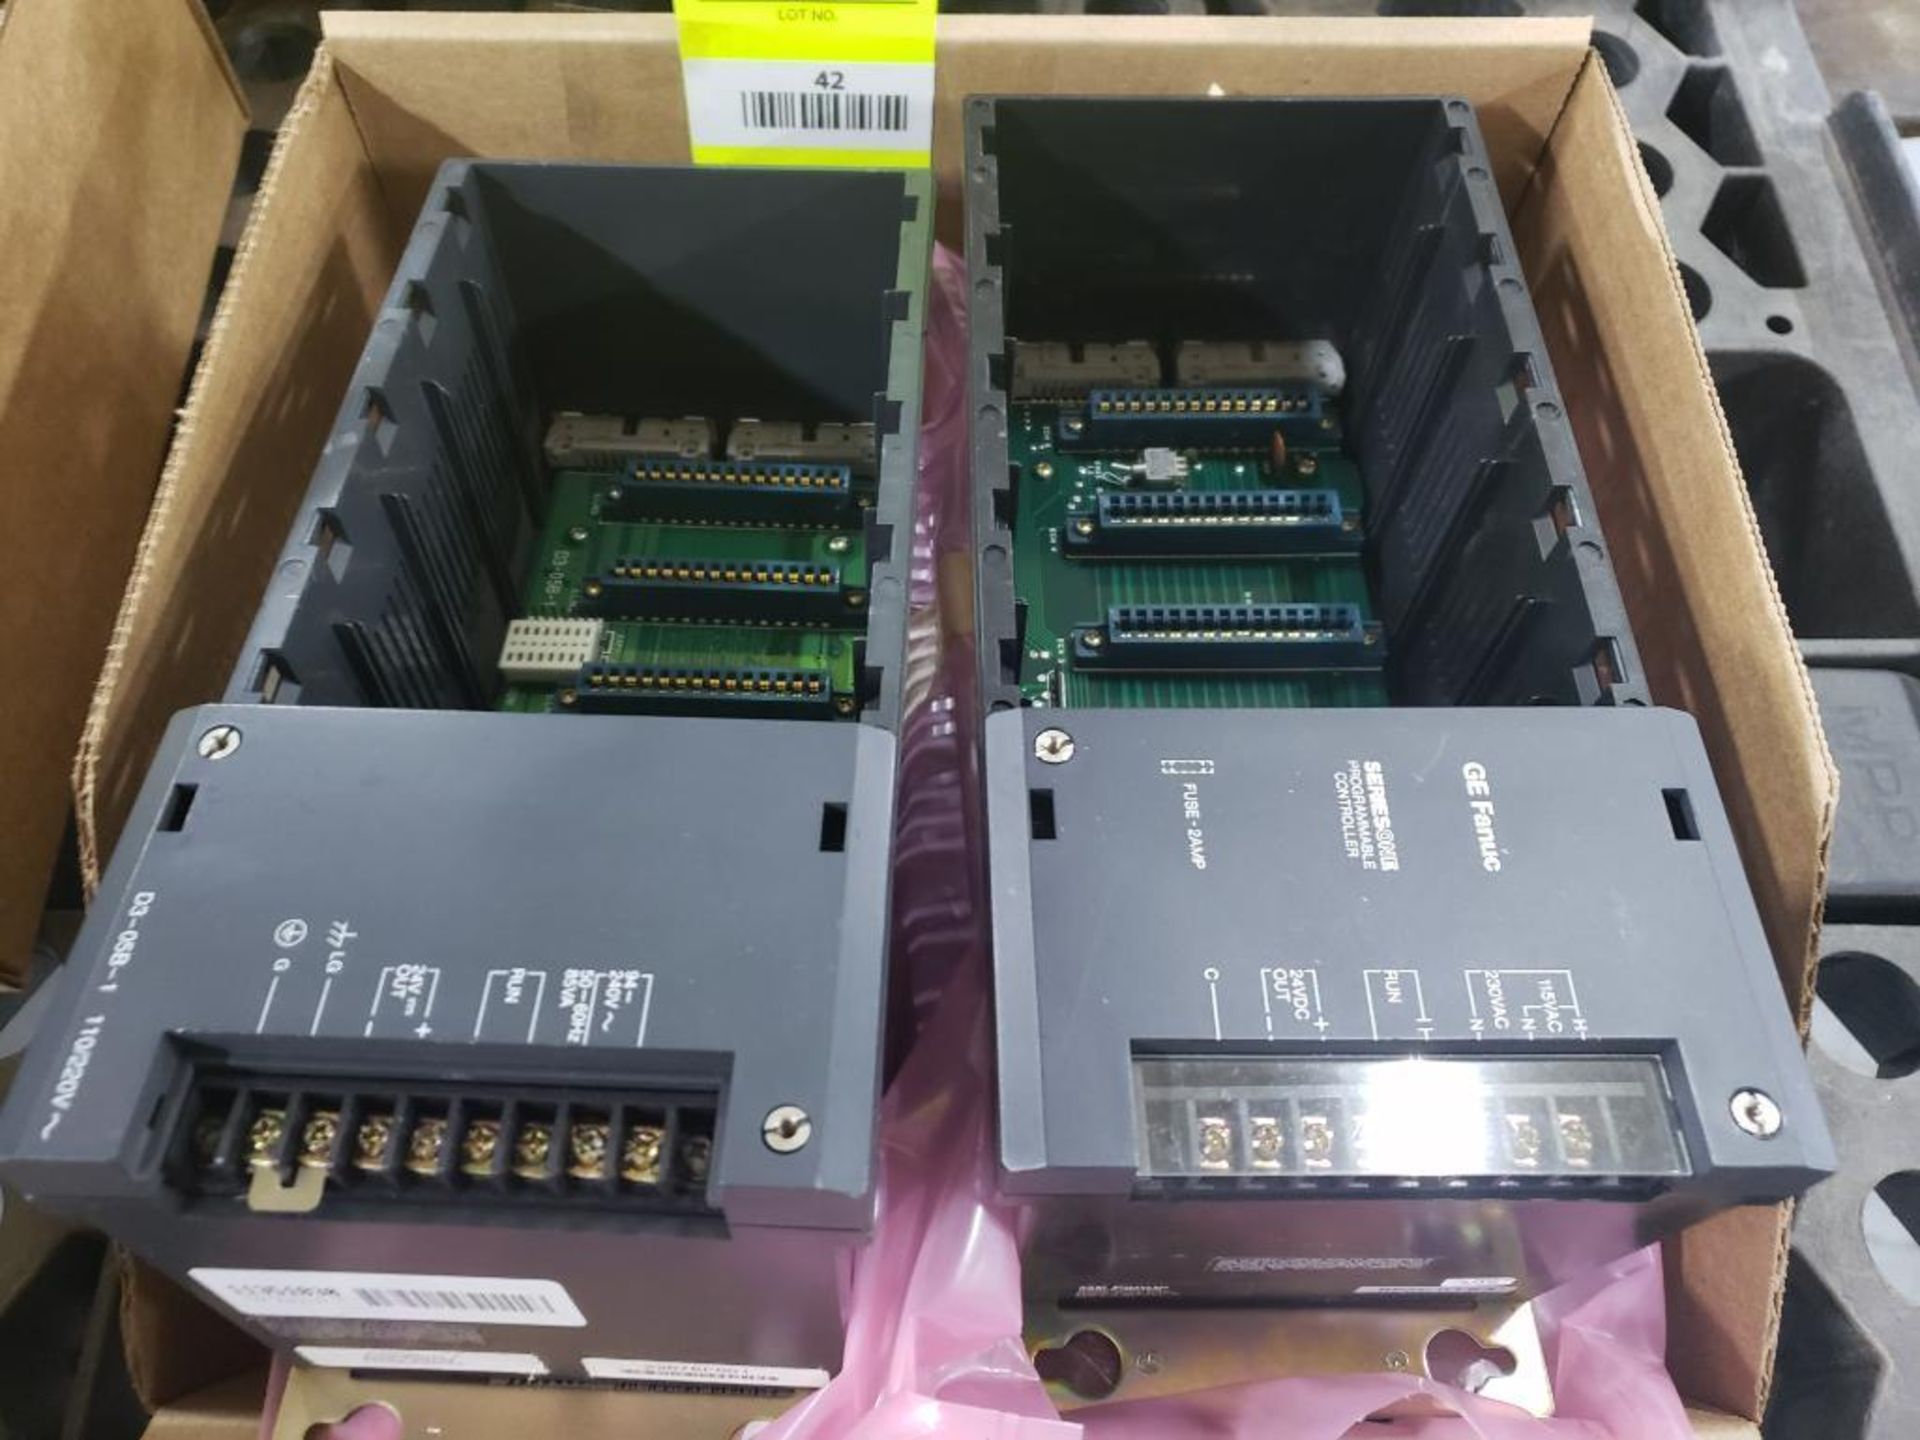 Qty 2 - GE Series One programmable controller PLC racks.